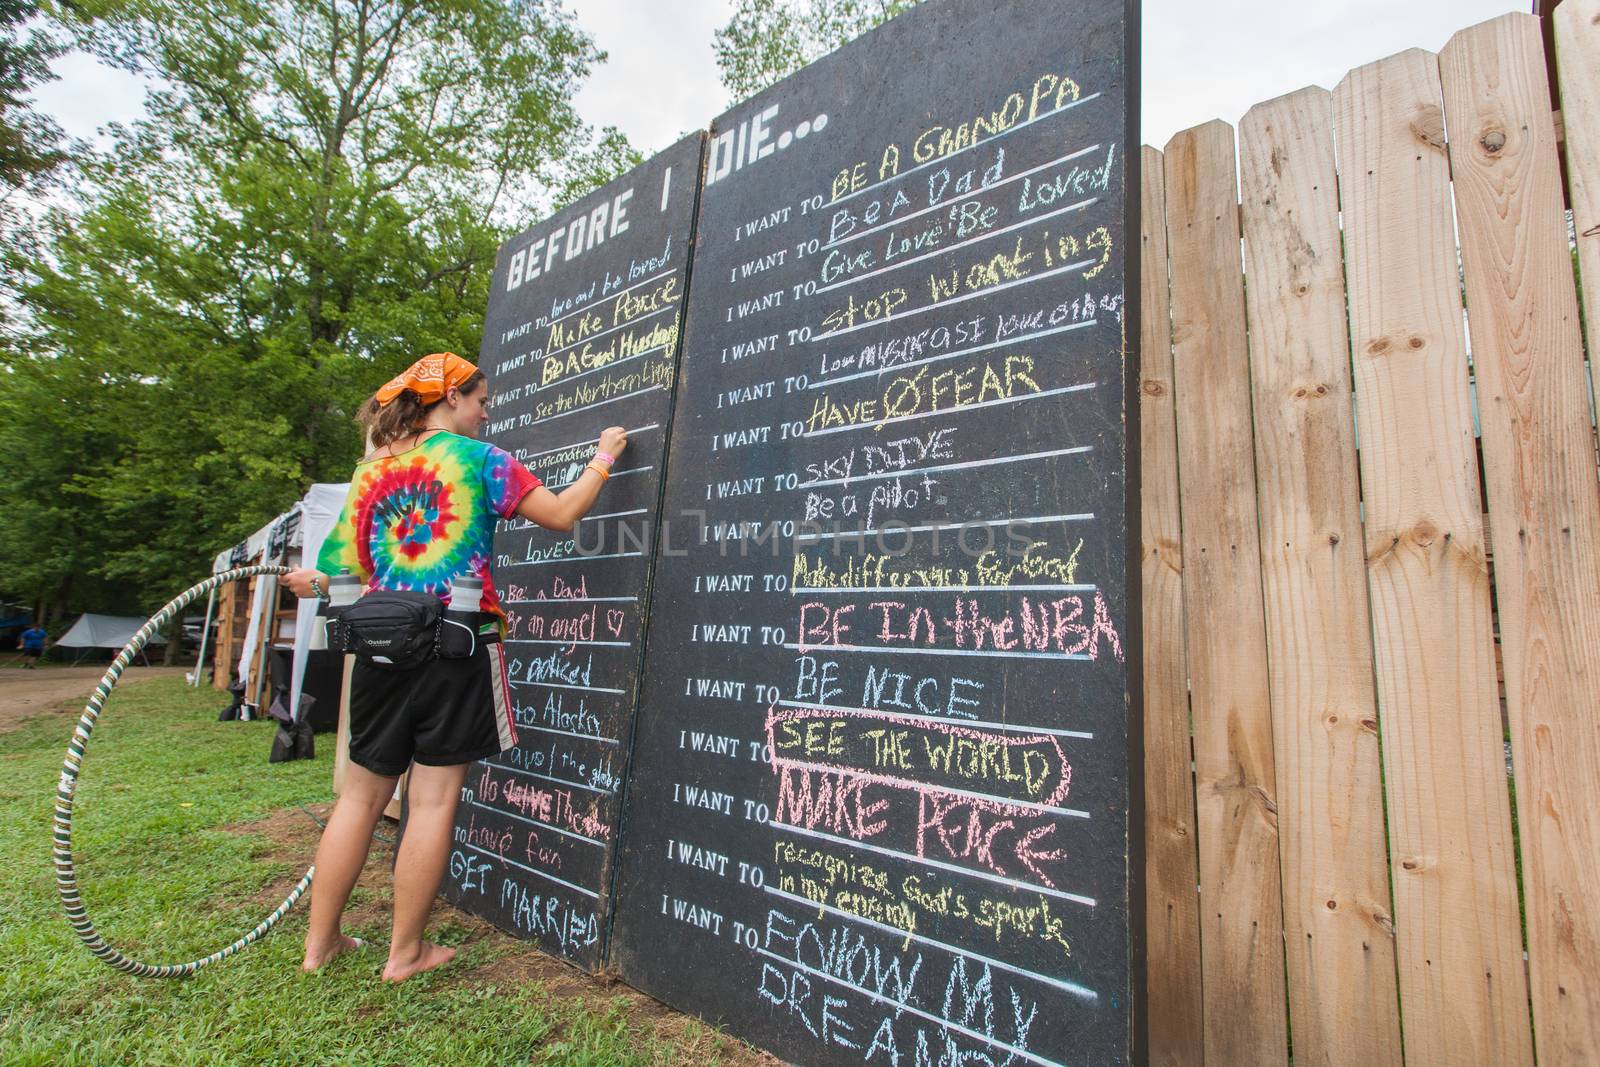 HOT SPRINGS, NC - JULY 7: Single female with hula hoop writing on before I die list blackboard at the Wild Goose Festival on July 7, 2016 in Hot Springs, NC, USA.